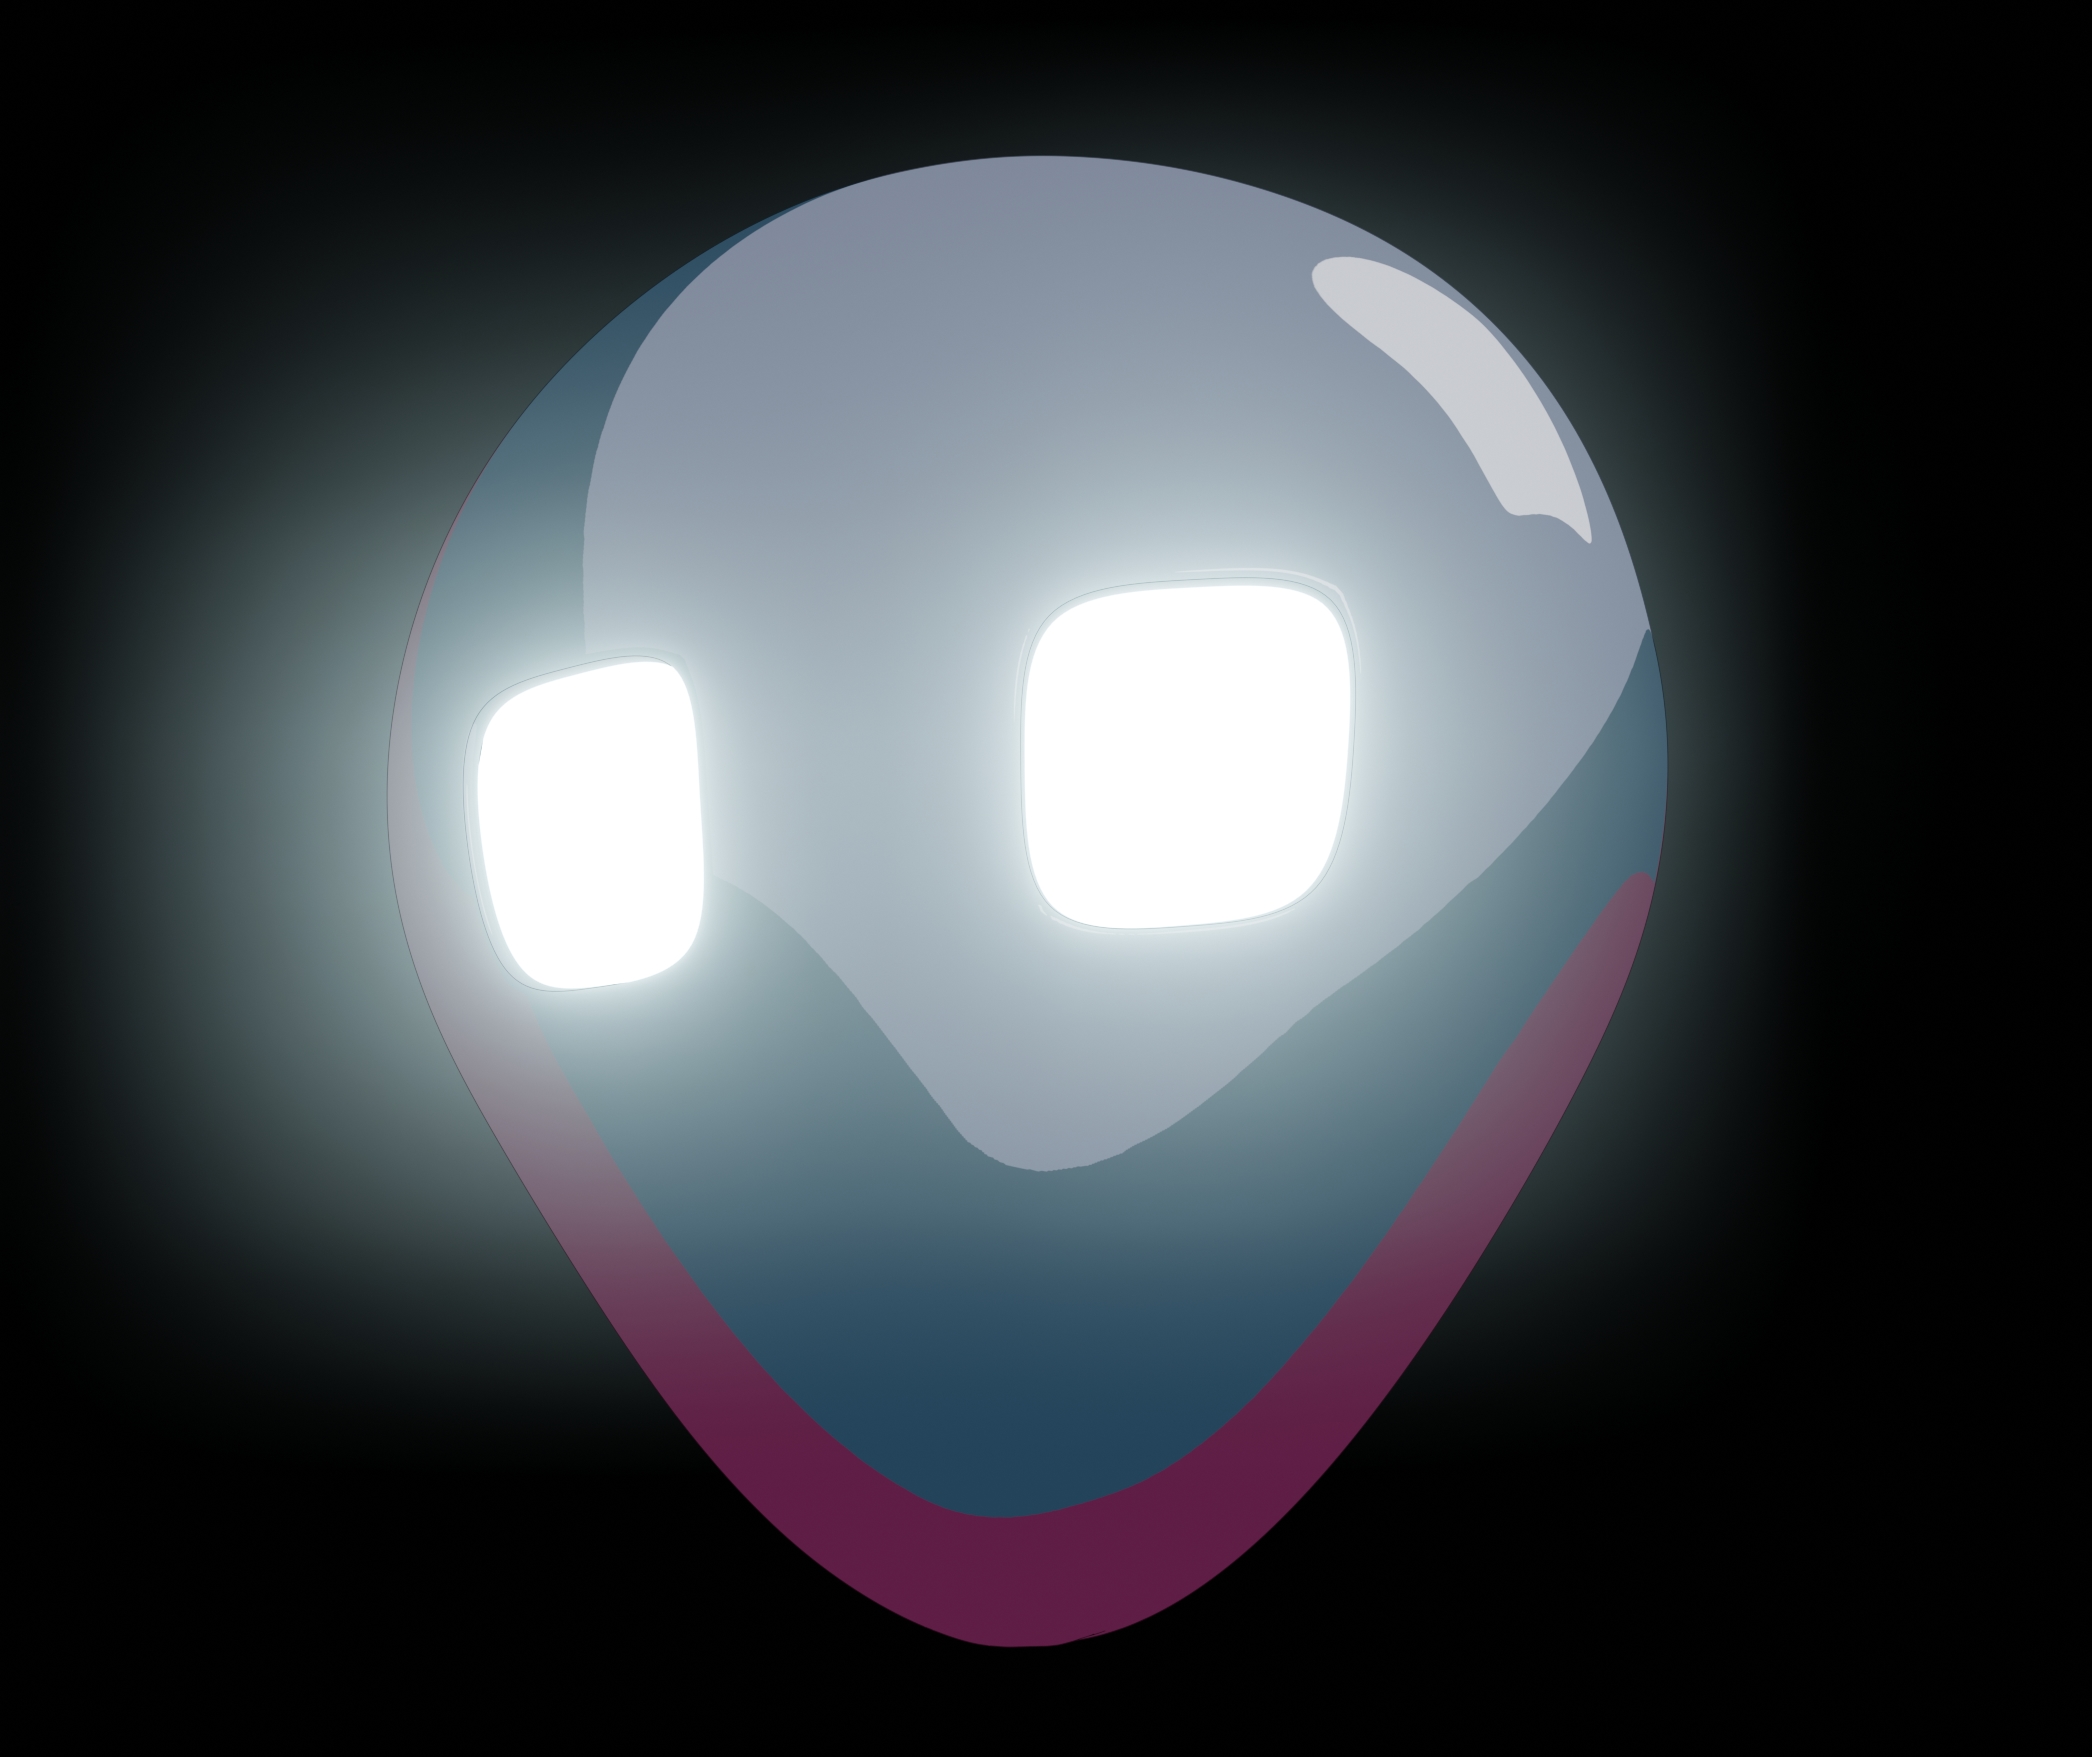 Mask (w/ shaders) preview image 1